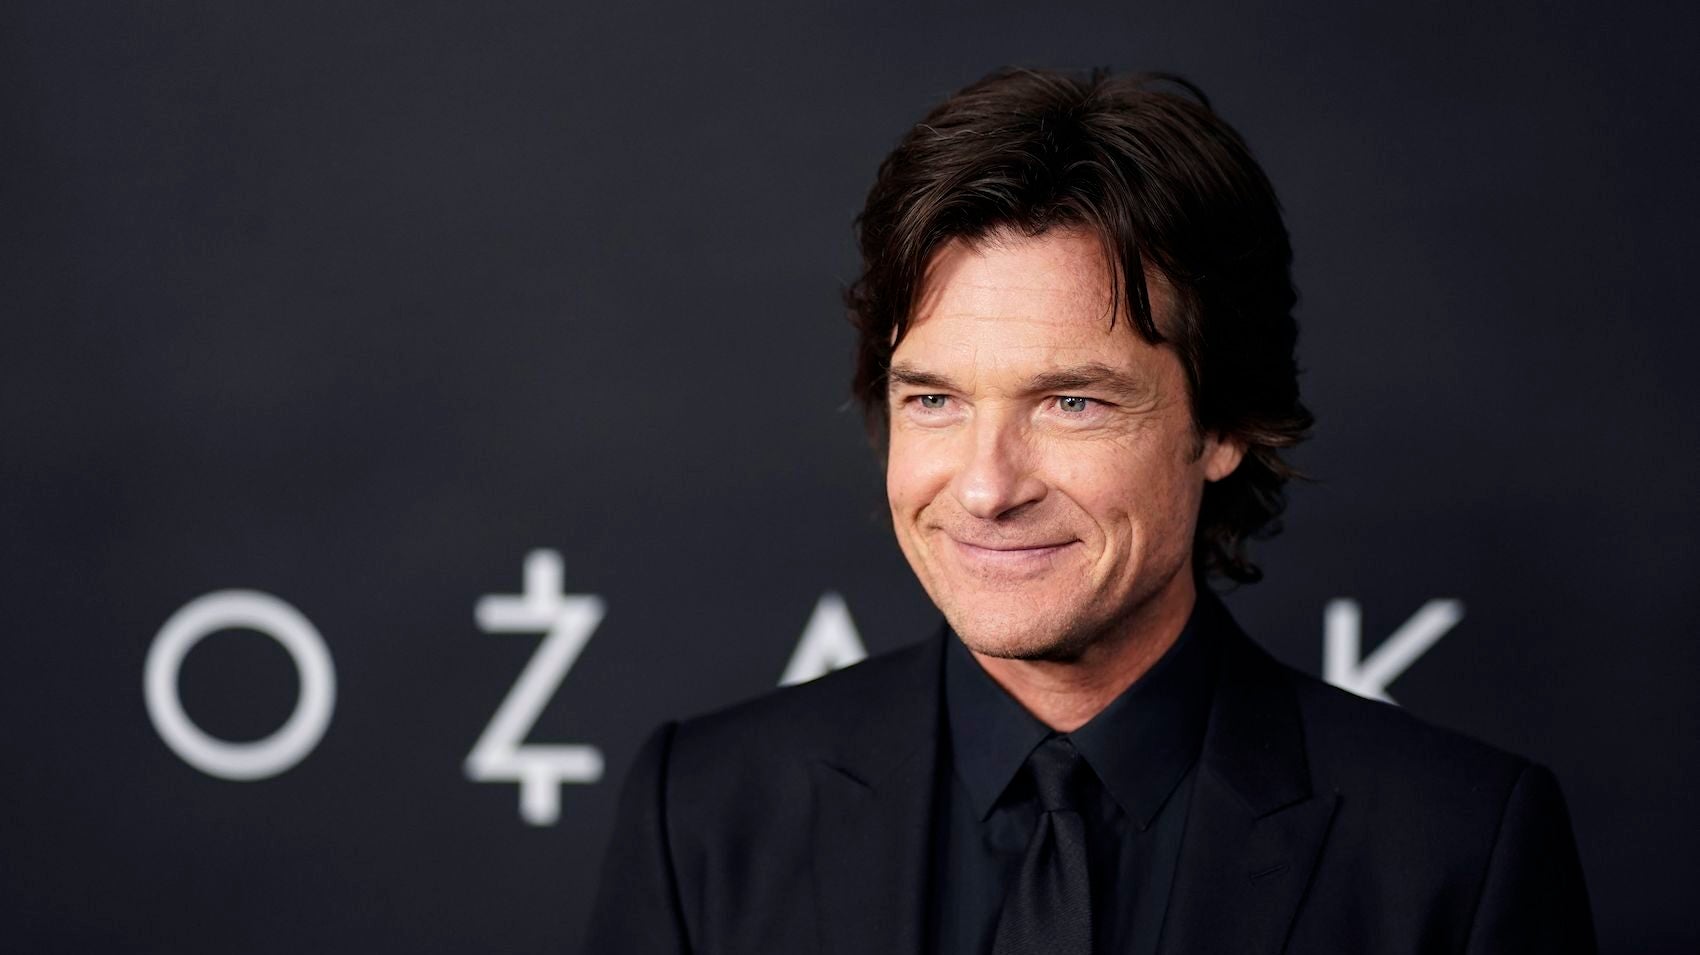 Jason Bateman attends the world premiere of the final episodes of 